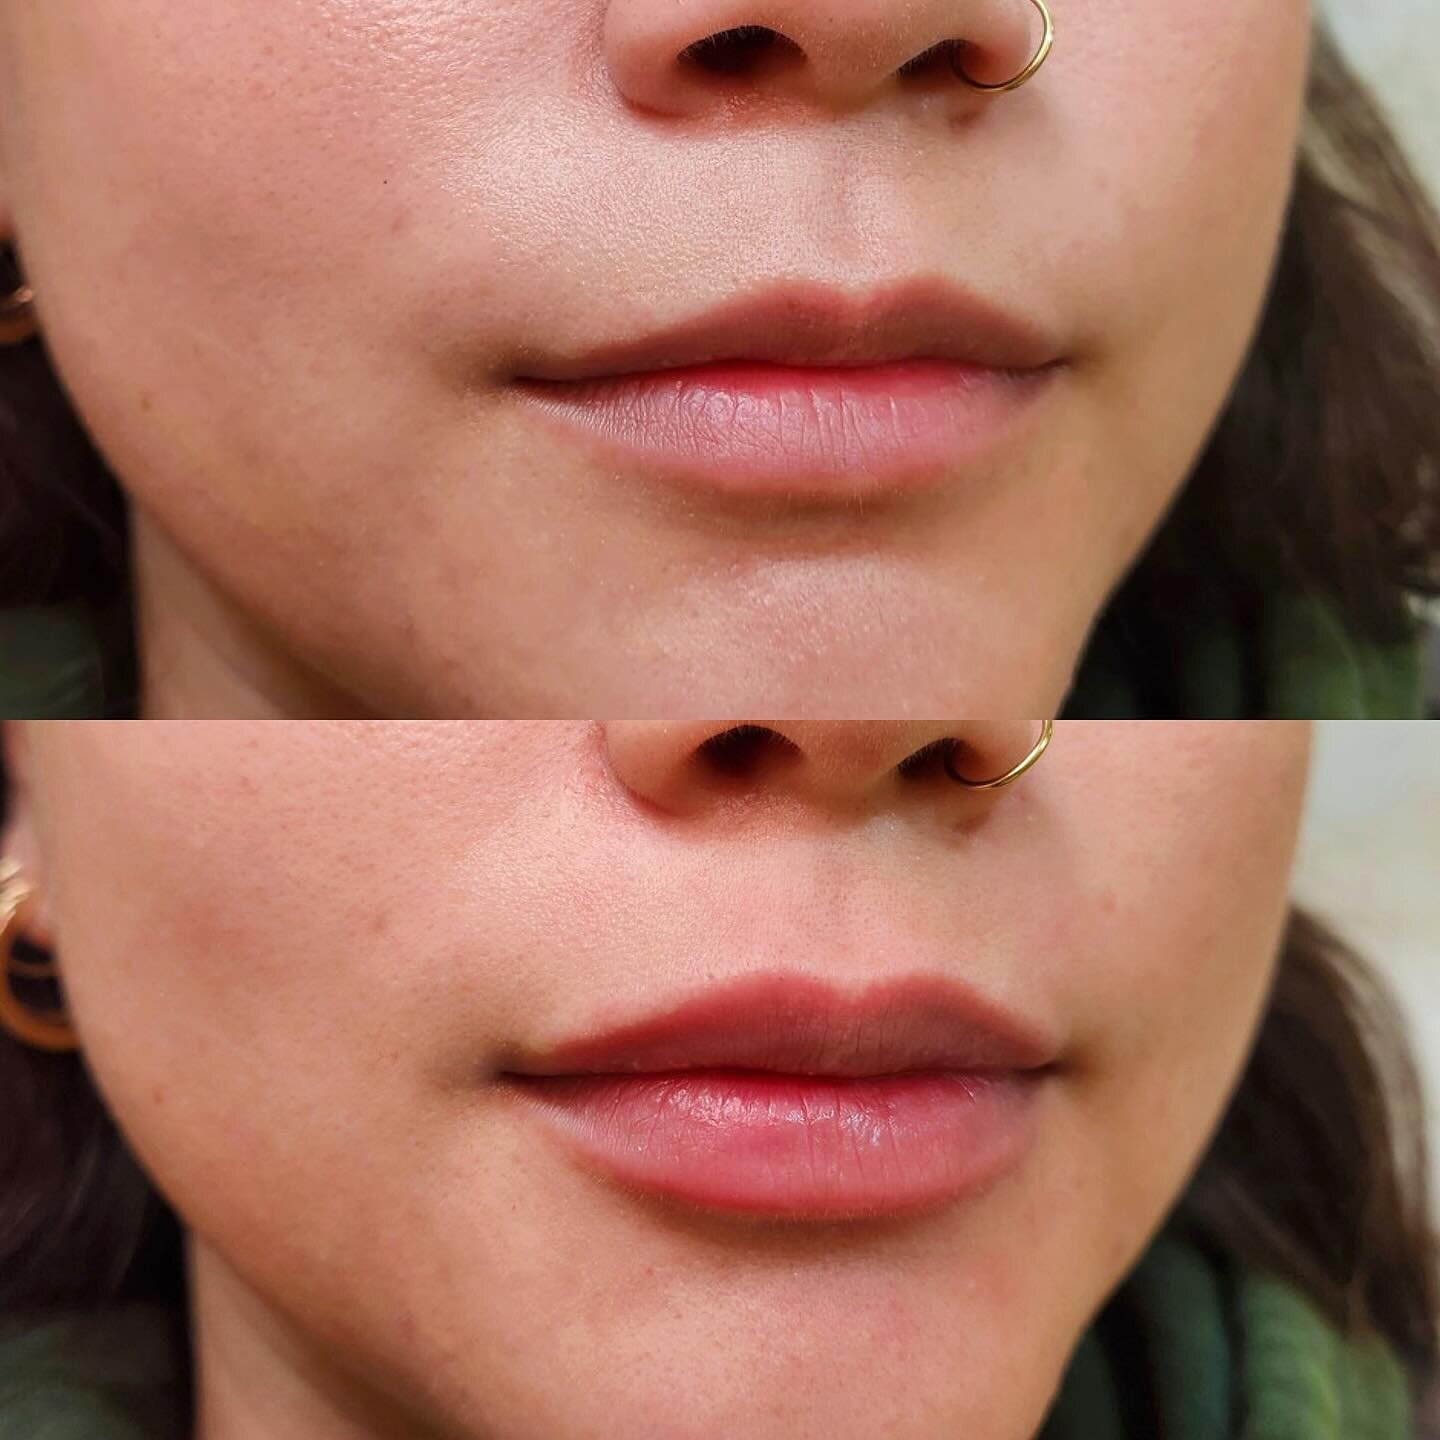 She had such beautiful lips to begin with. We gave her lips subtle volume while increasing height in her lips to balance out proportions in her lower face. 

Lips by @nurseval_ 
&mdash;&mdash;&mdash;&mdash;&mdash;&mdash;&mdash;&mdash;&mdash;
V &amp; 